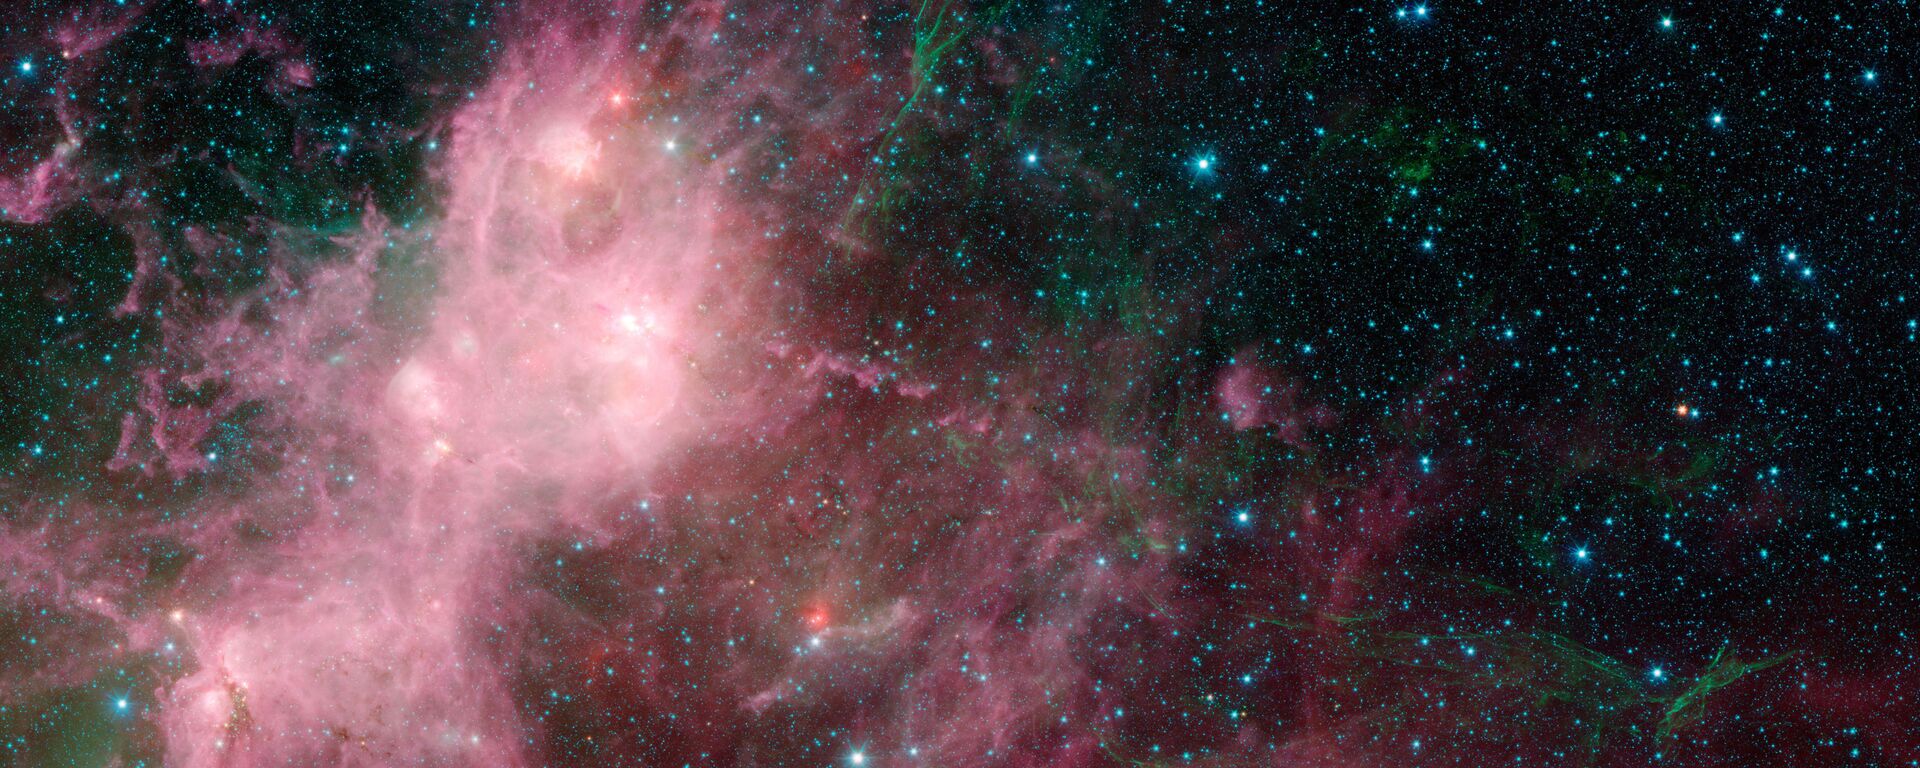 This image made available by NASA shows infrared data from the Spitzer Space Telescope and Wide-field Infrared Survey Explorer (WISE) in an area known as the W3 and W5 star-forming regions within the Milky Way Galaxy - Sputnik International, 1920, 25.03.2021